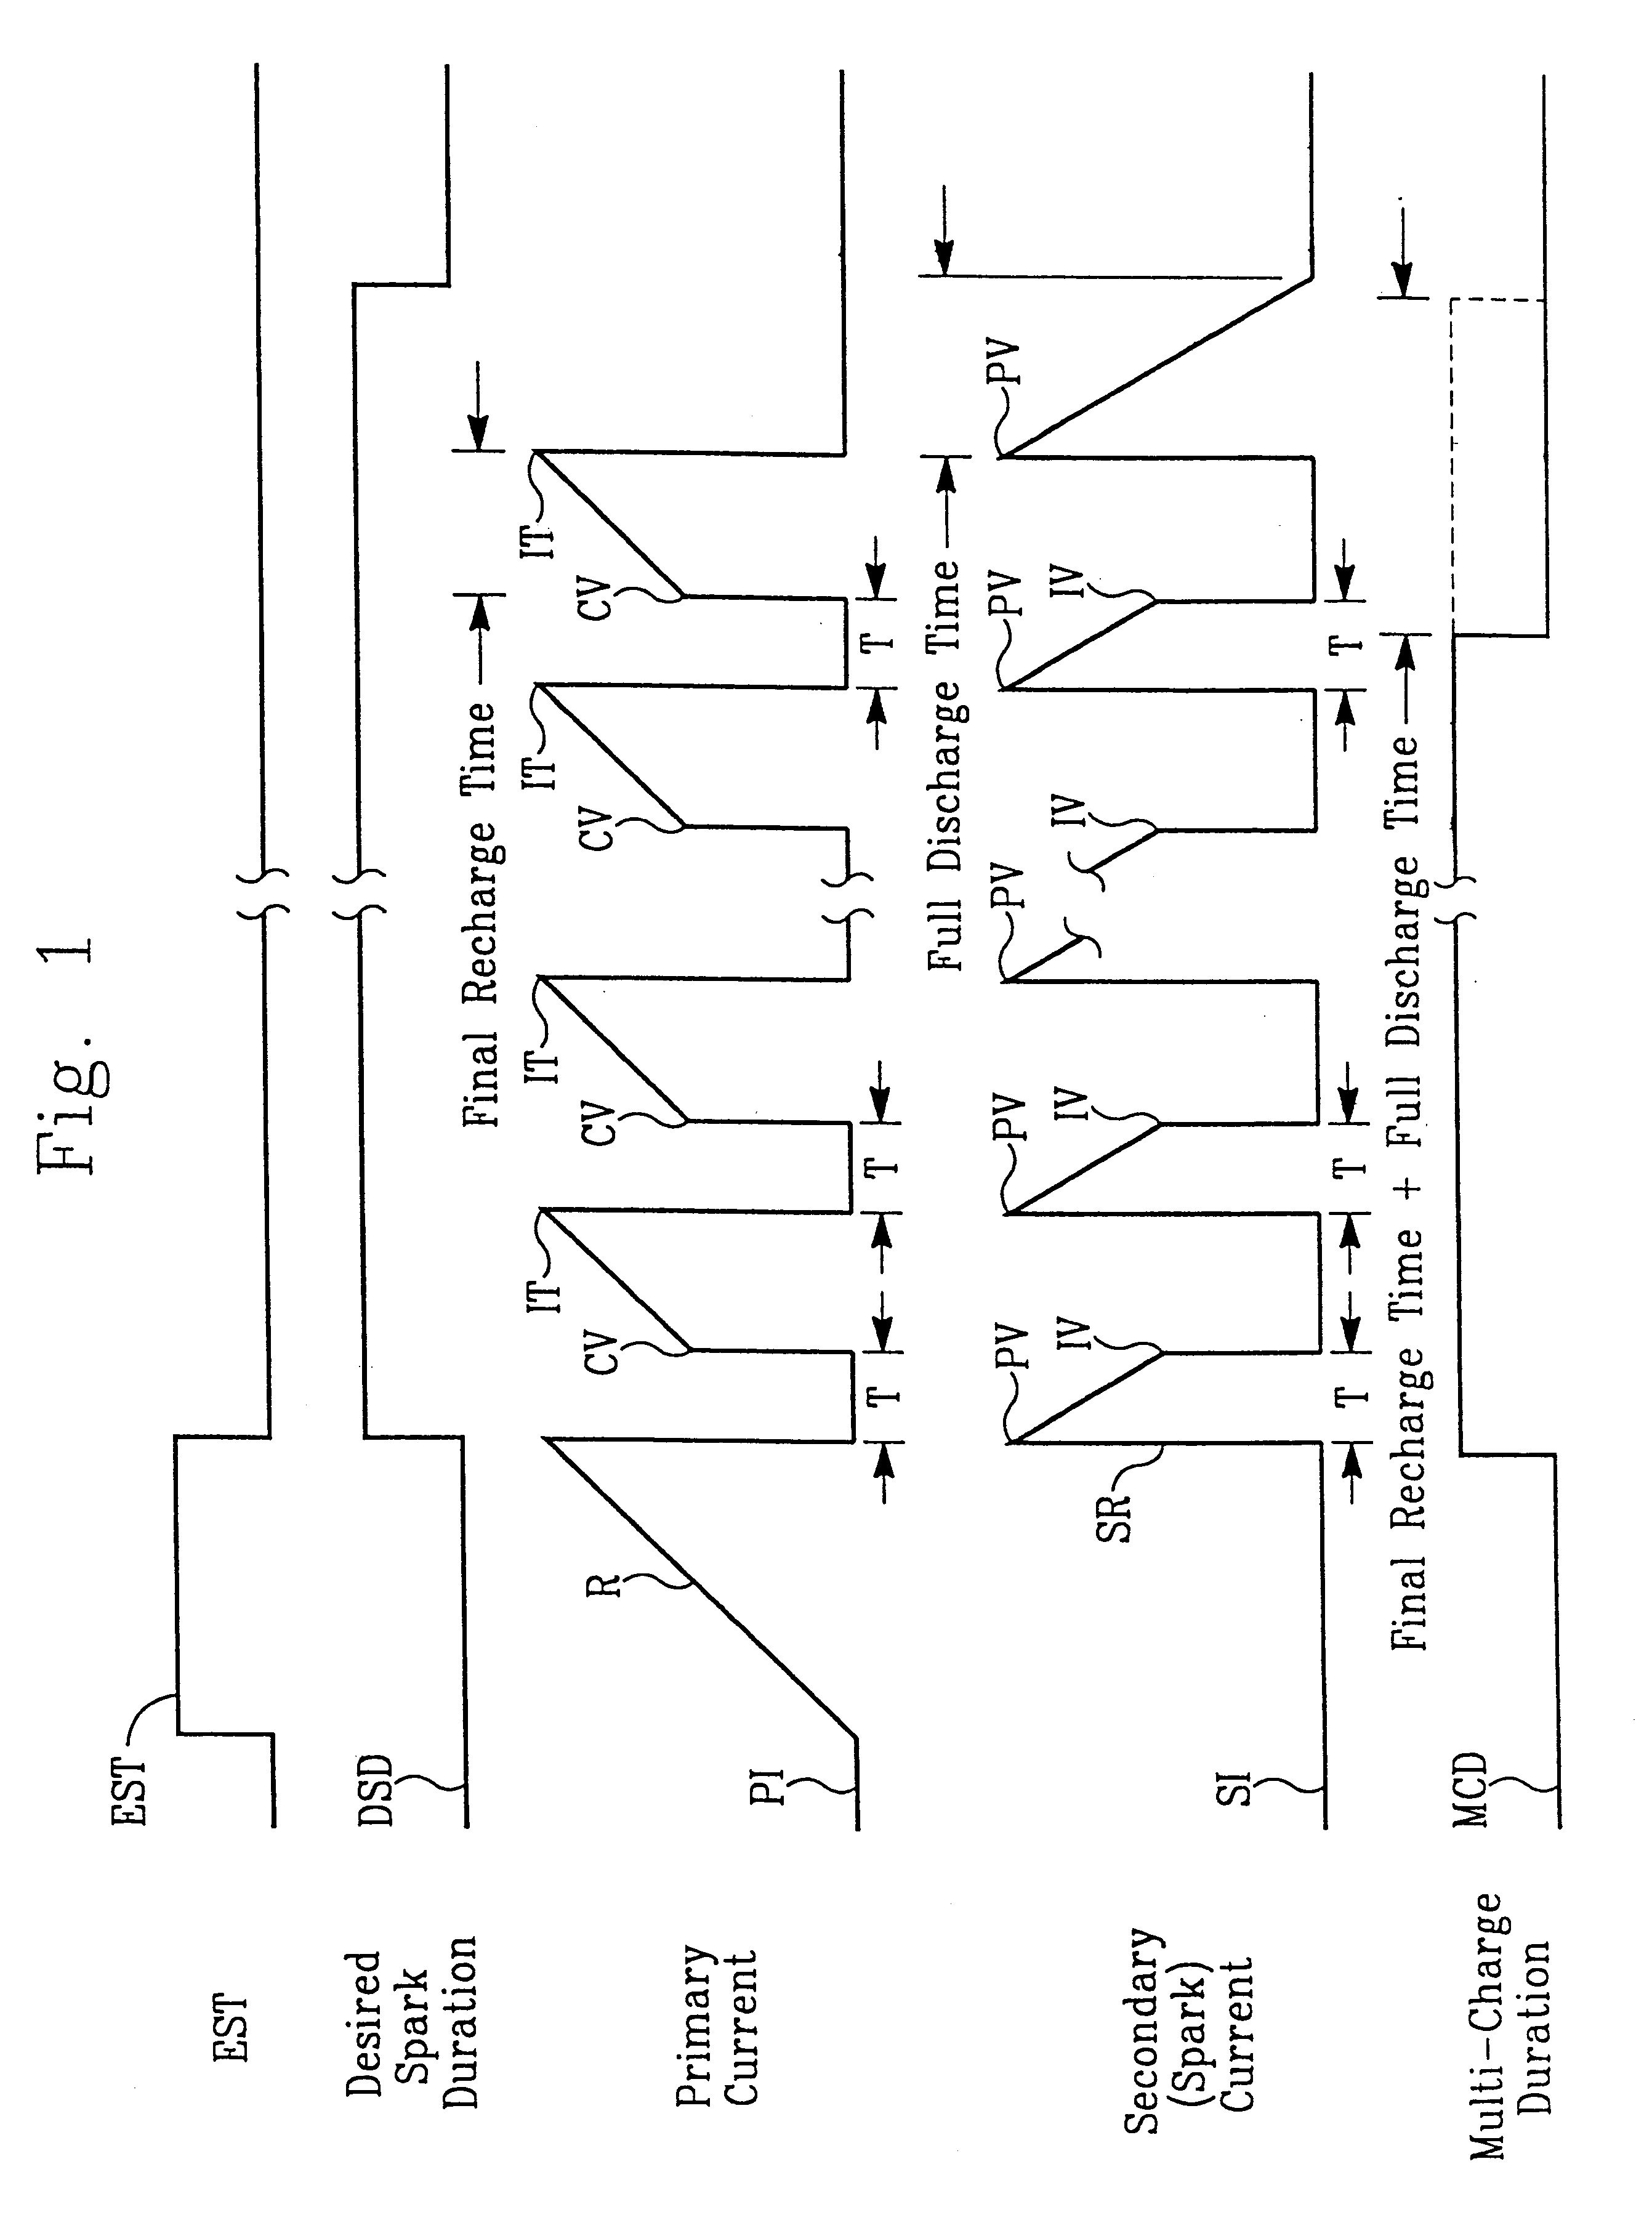 System and method for providing multicharge ignition